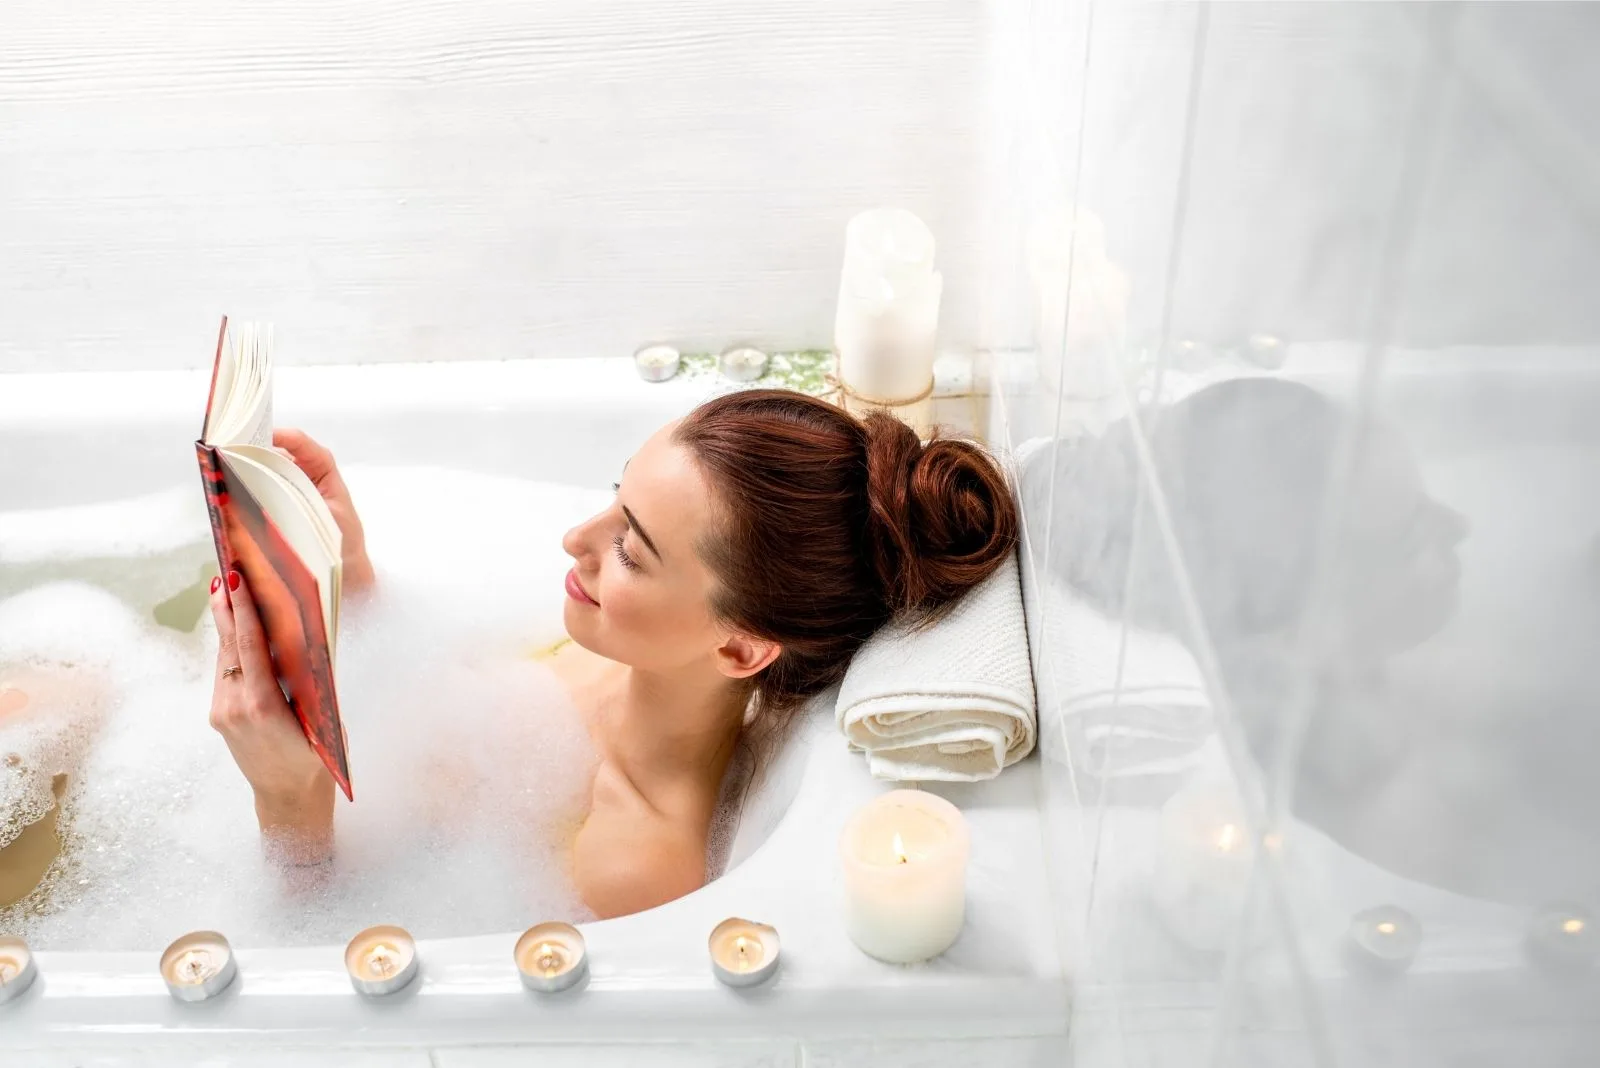 woman enjoyed bathing in the tub with lighted candles around while reading a book